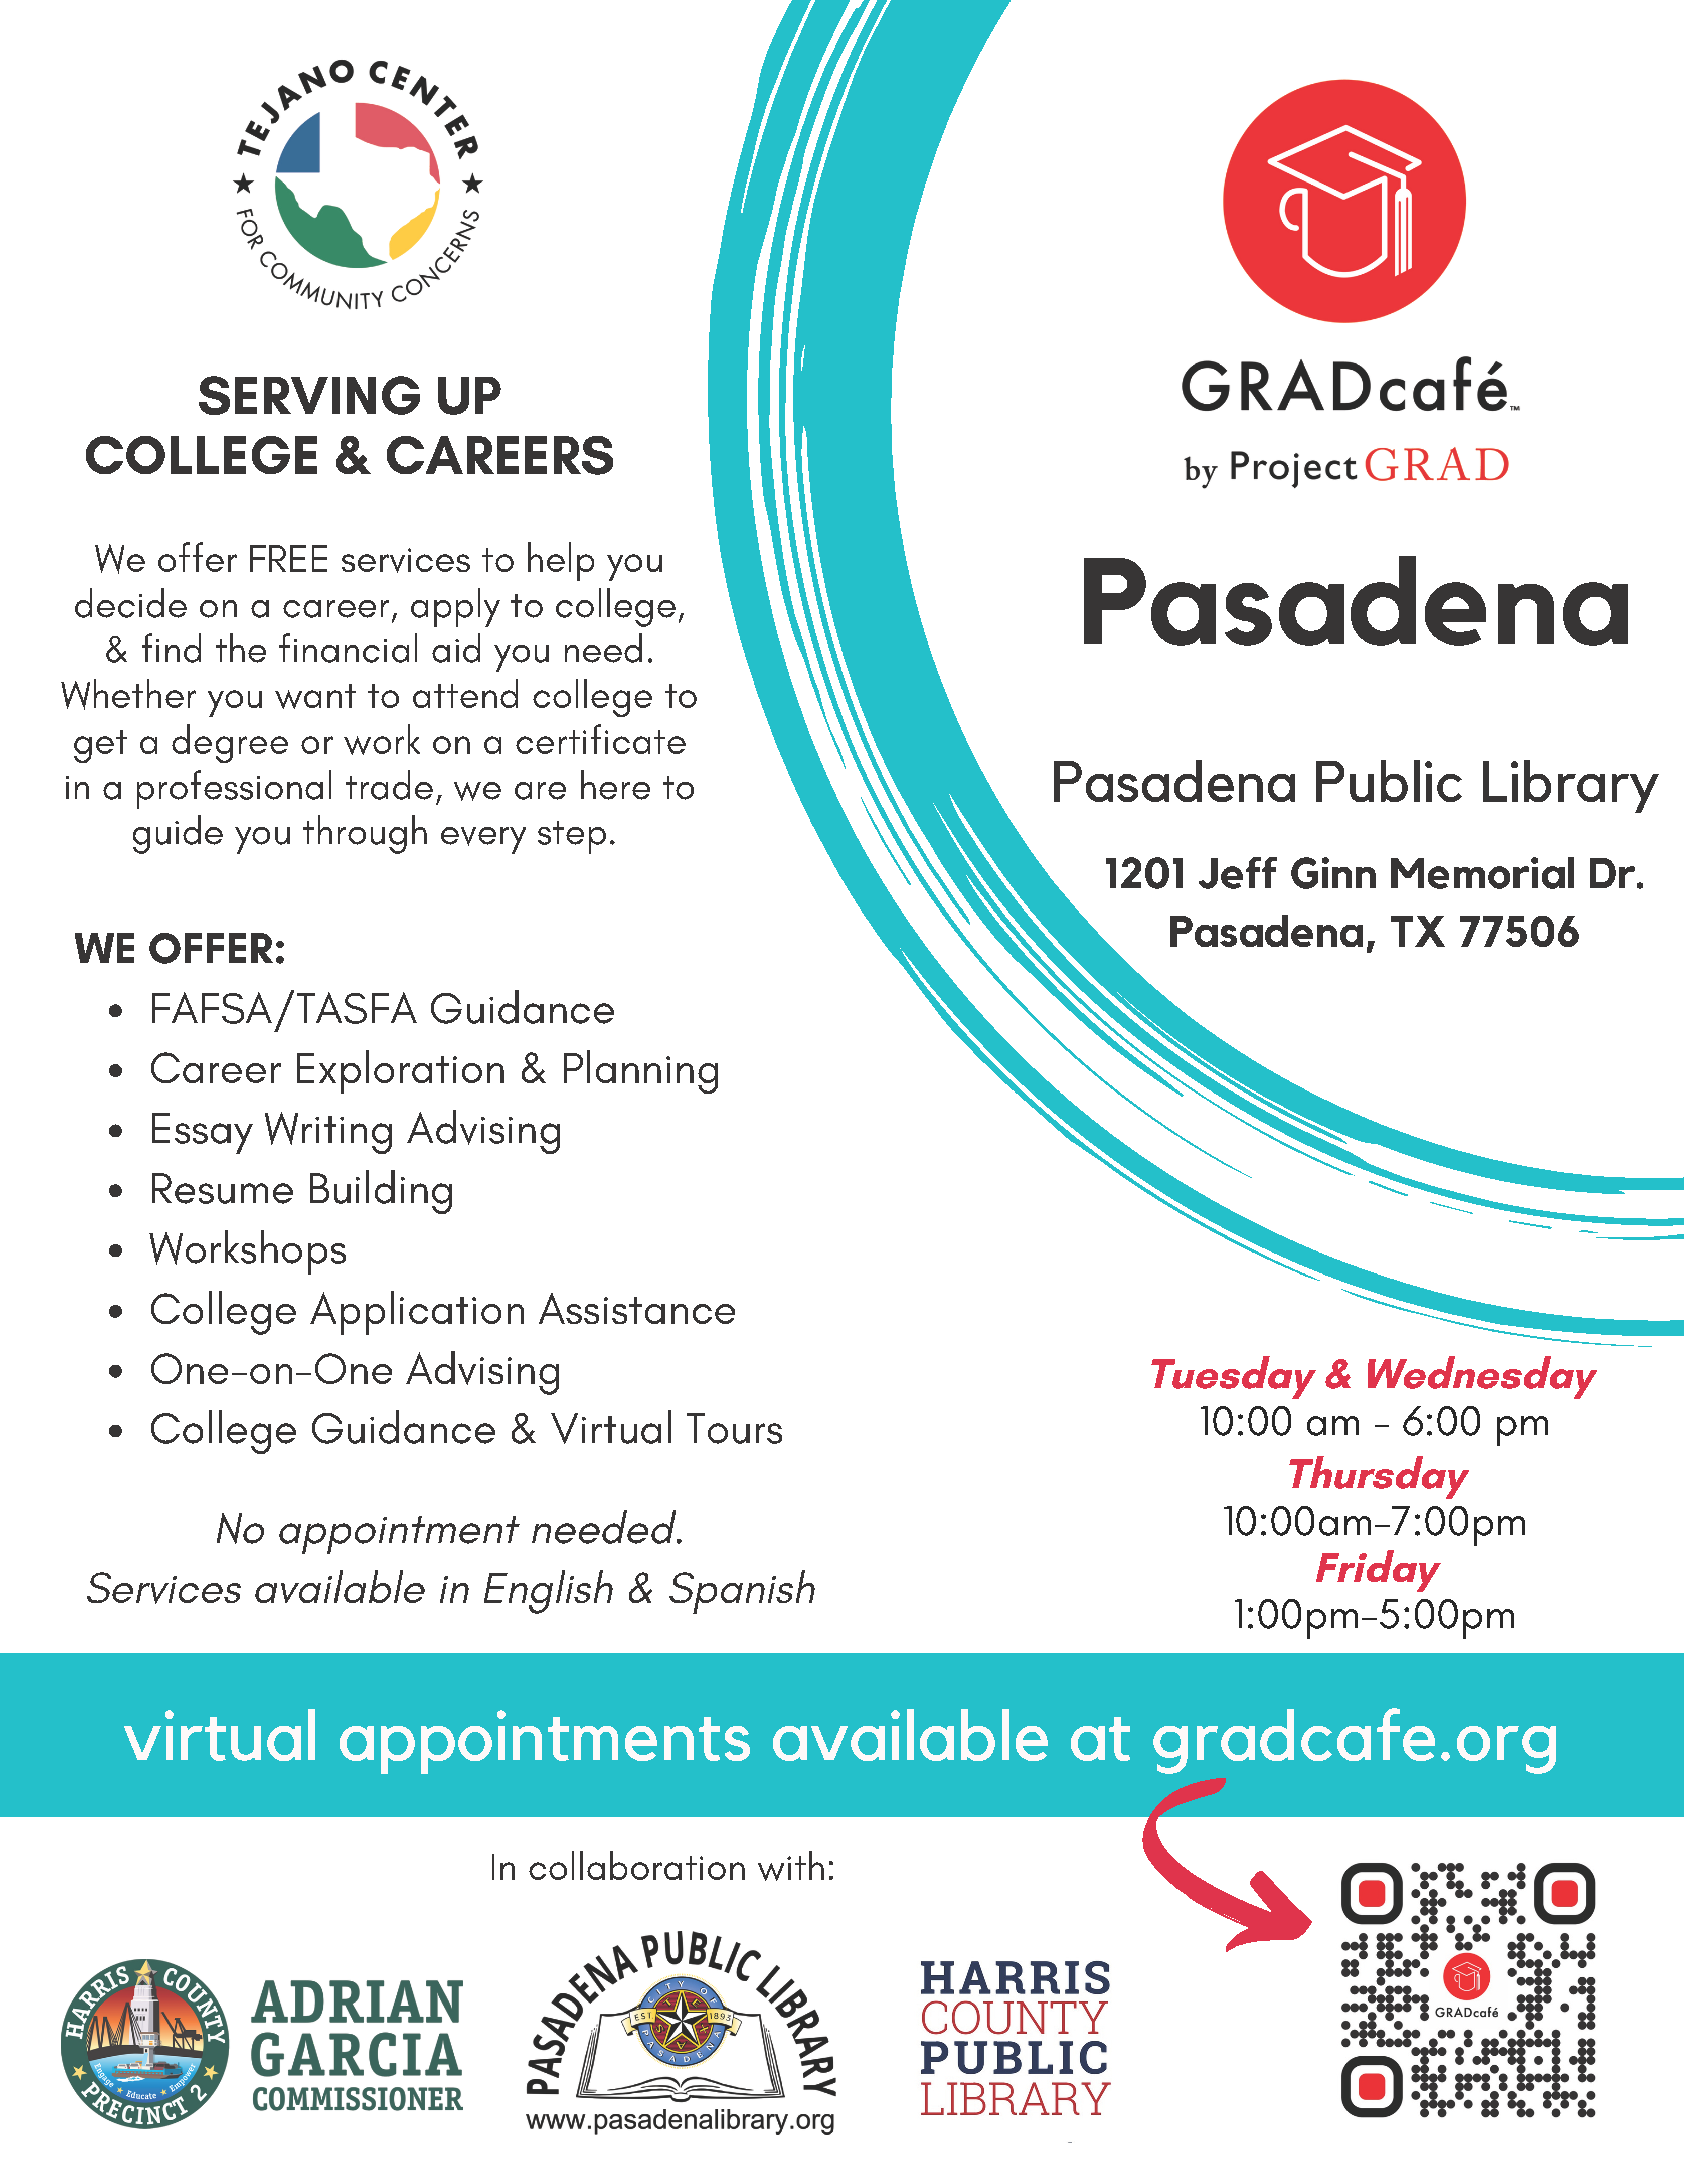 GRADcafé  Need help with your Financial Aid application? GRADcafé will be at Central Library for in-person advising Tuesdays and Wednesdays 10:00AM to 6:00PM, Thursdays 10:00AM to 7:00PM, and Fridays 1:00 PM to 5:00 PM.